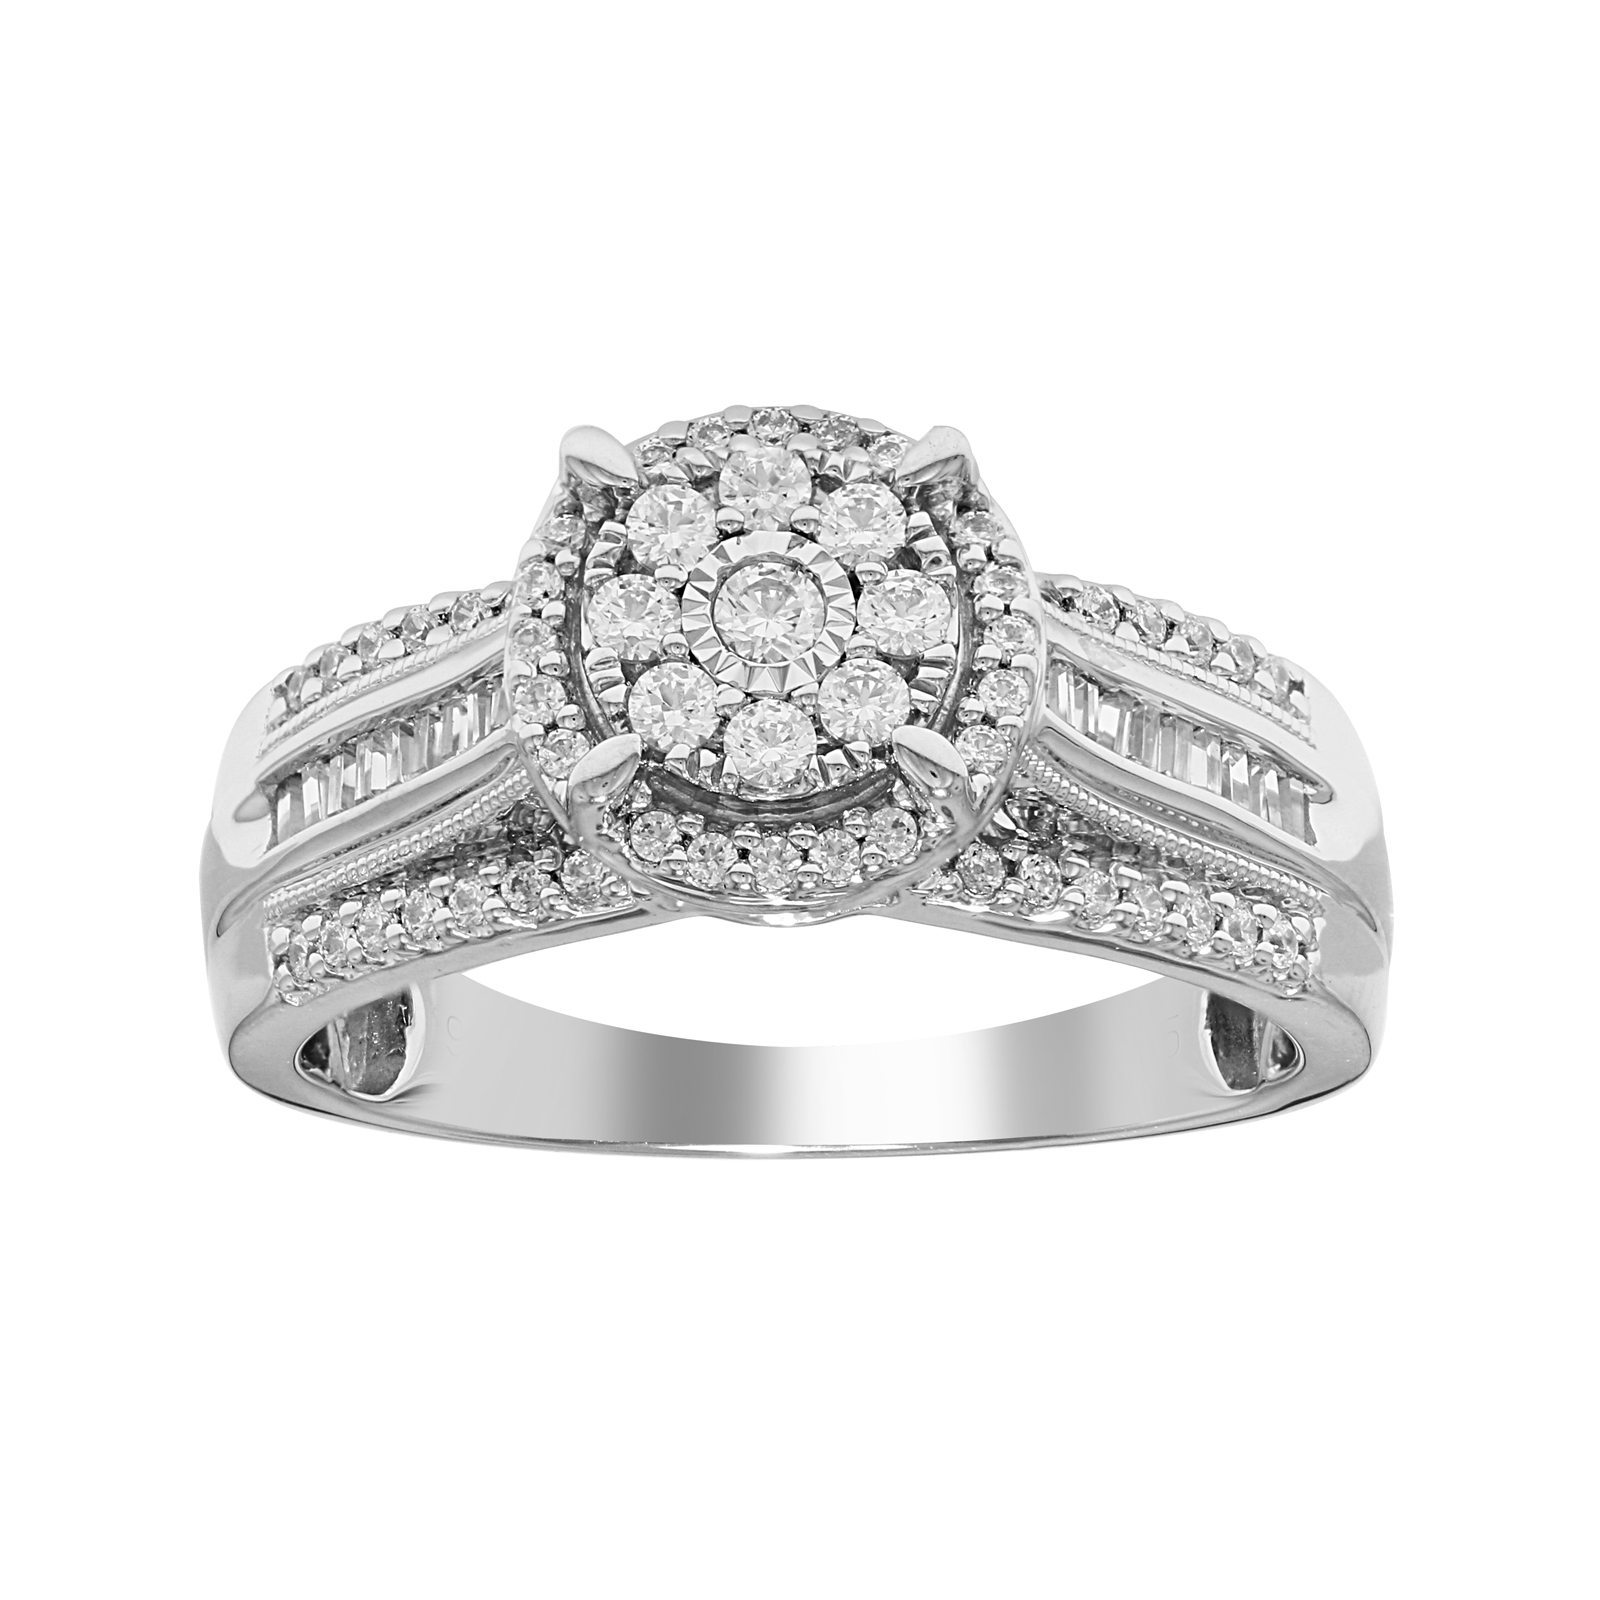 Sterling Silver 0.50CTTW Diamond Bridal Ring